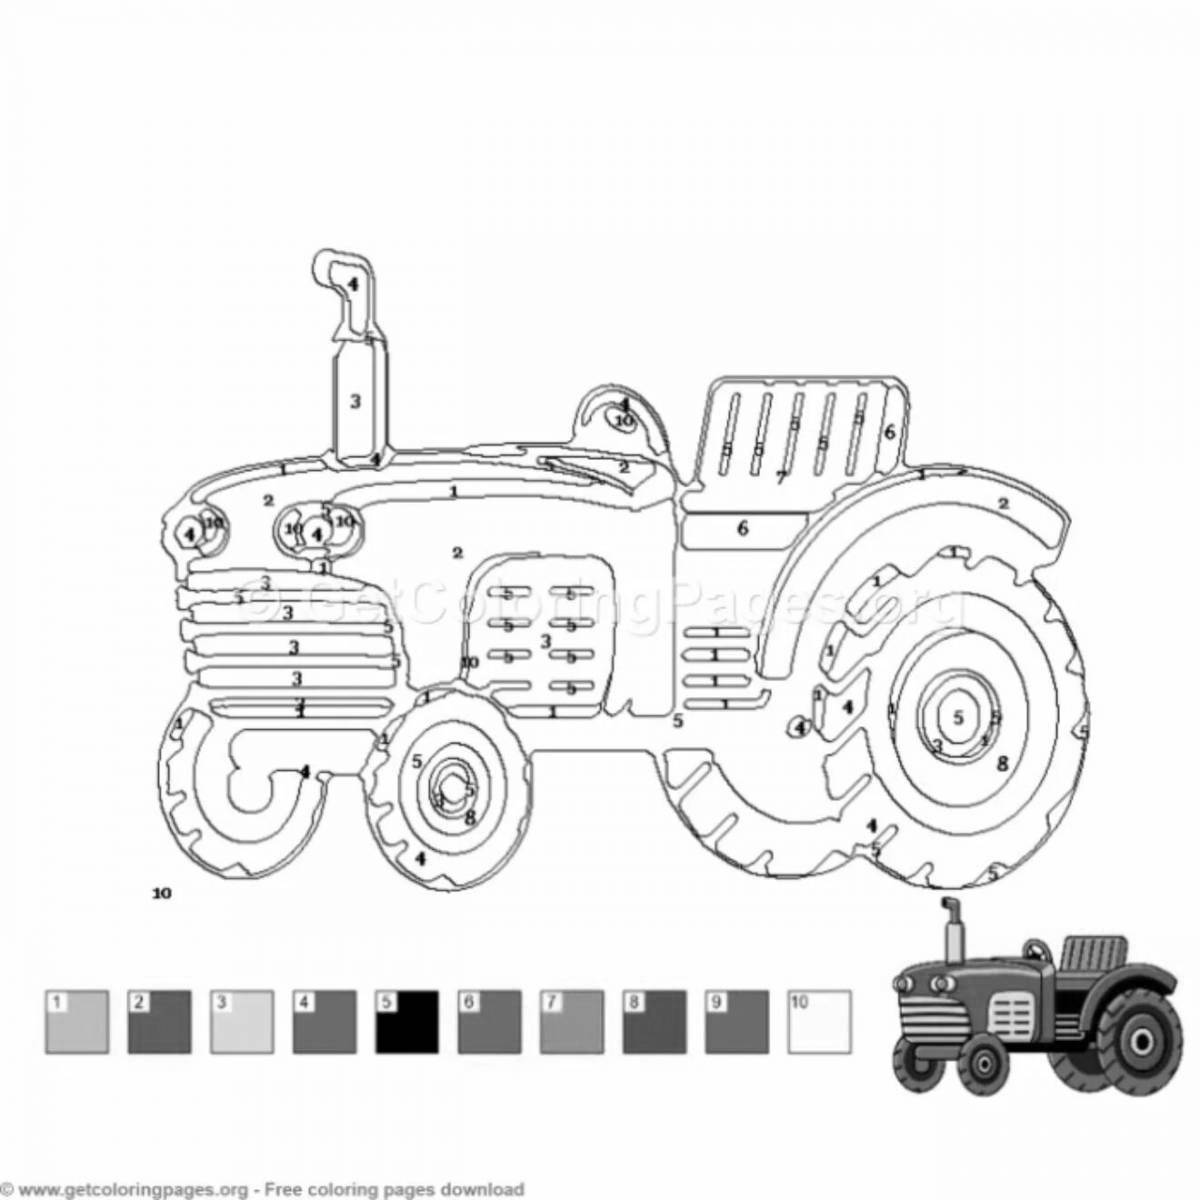 Fun truck number coloring page